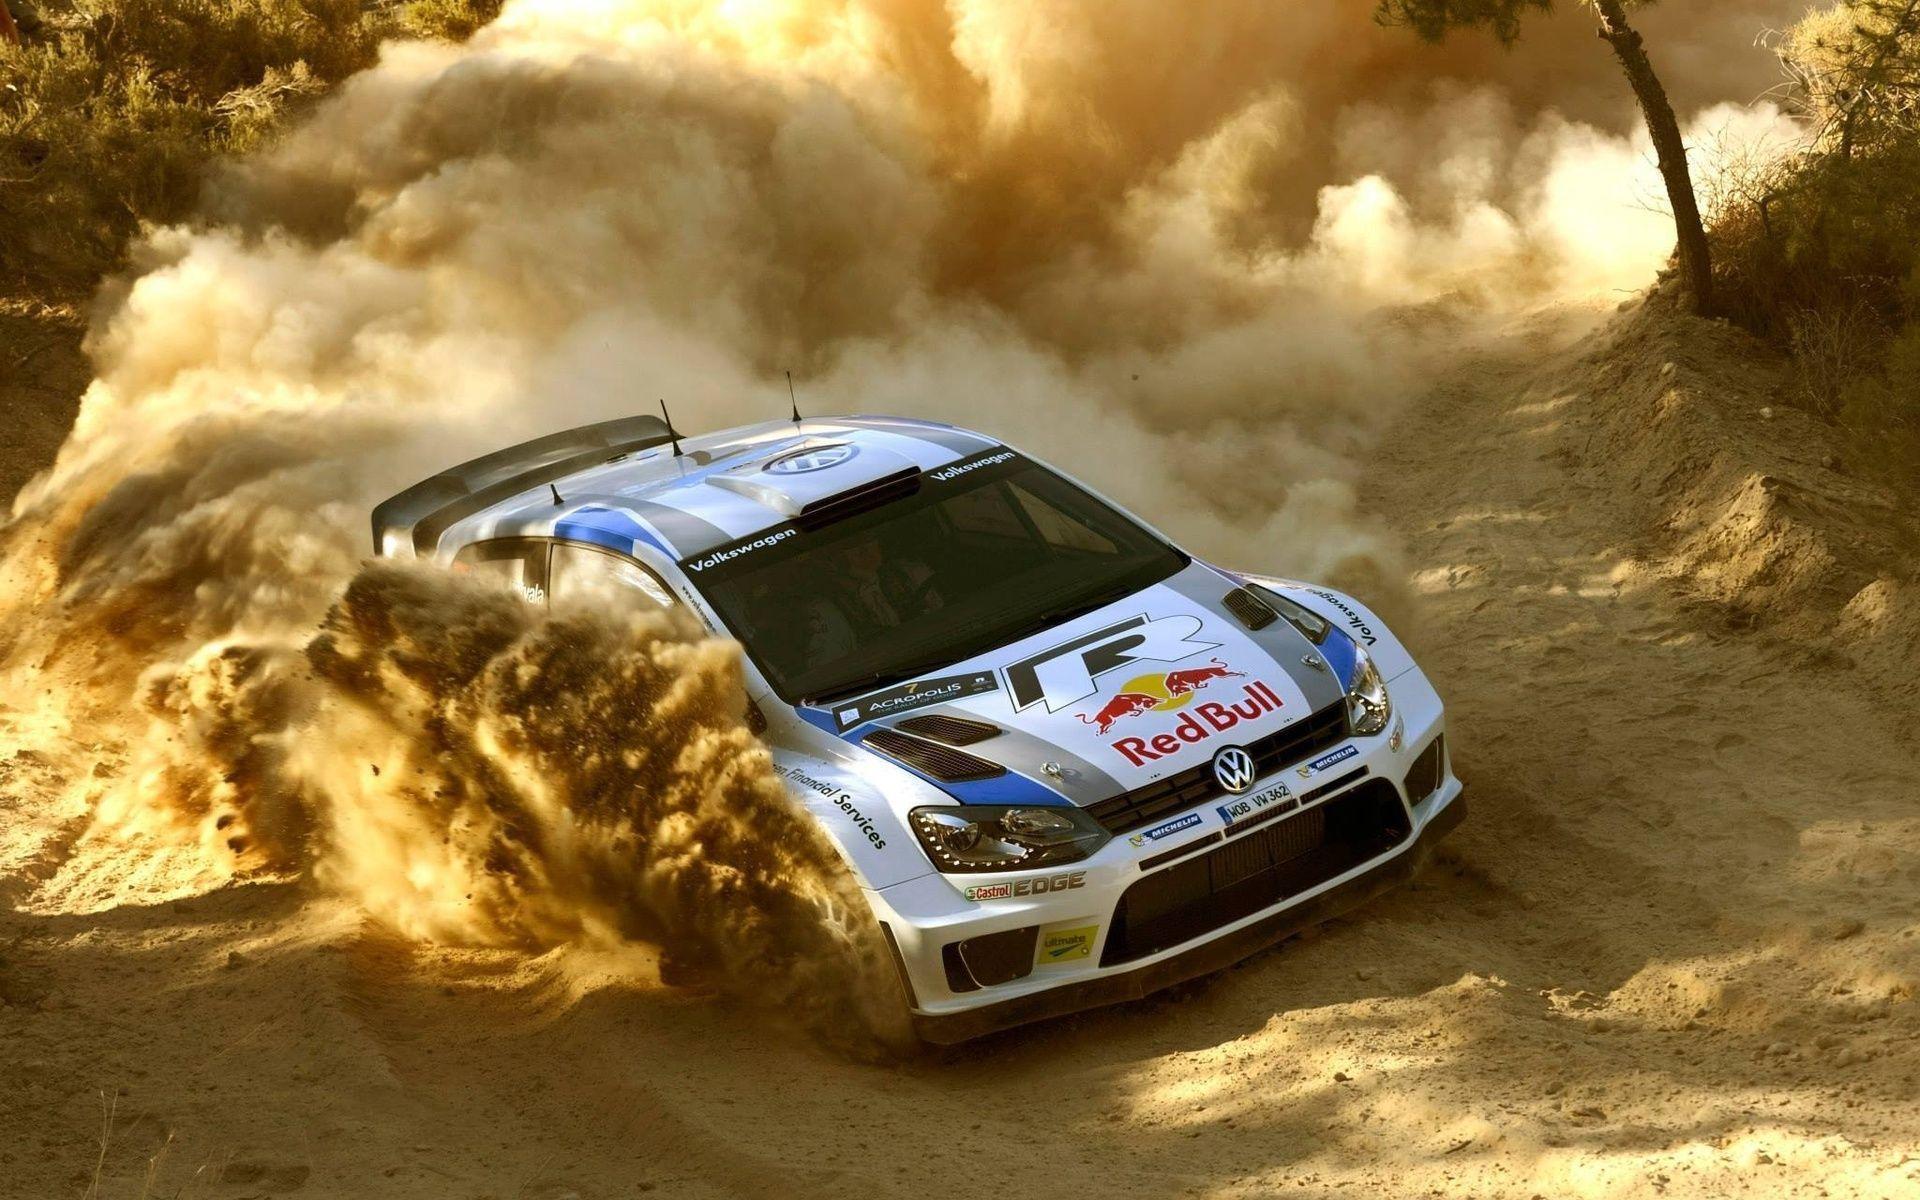 Volkswagen Polo in WRC Championship Drifting Dirt